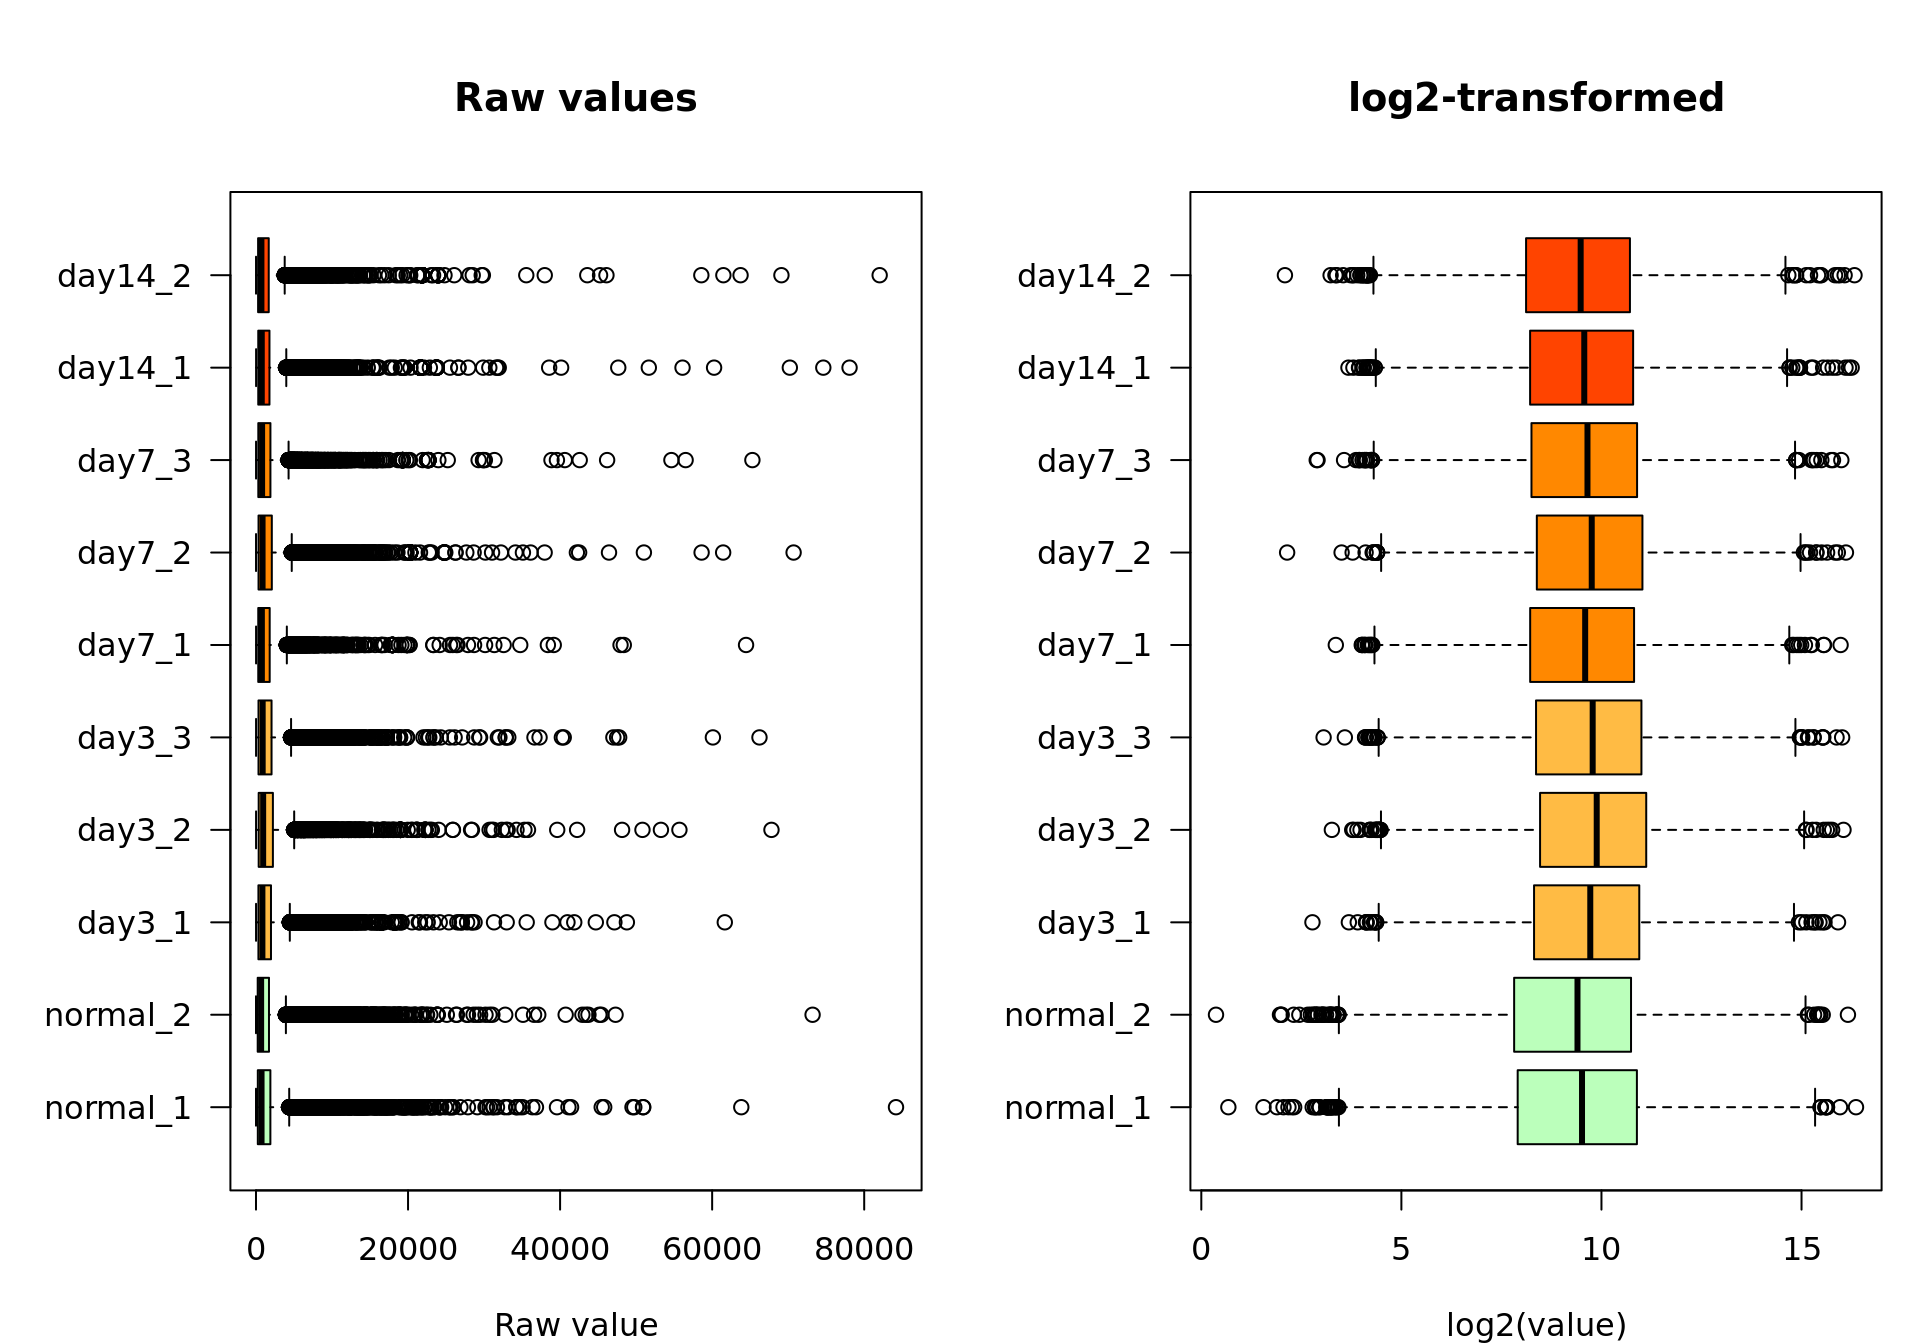 Box plot of the raw values (left) and log2-transformed values (right)